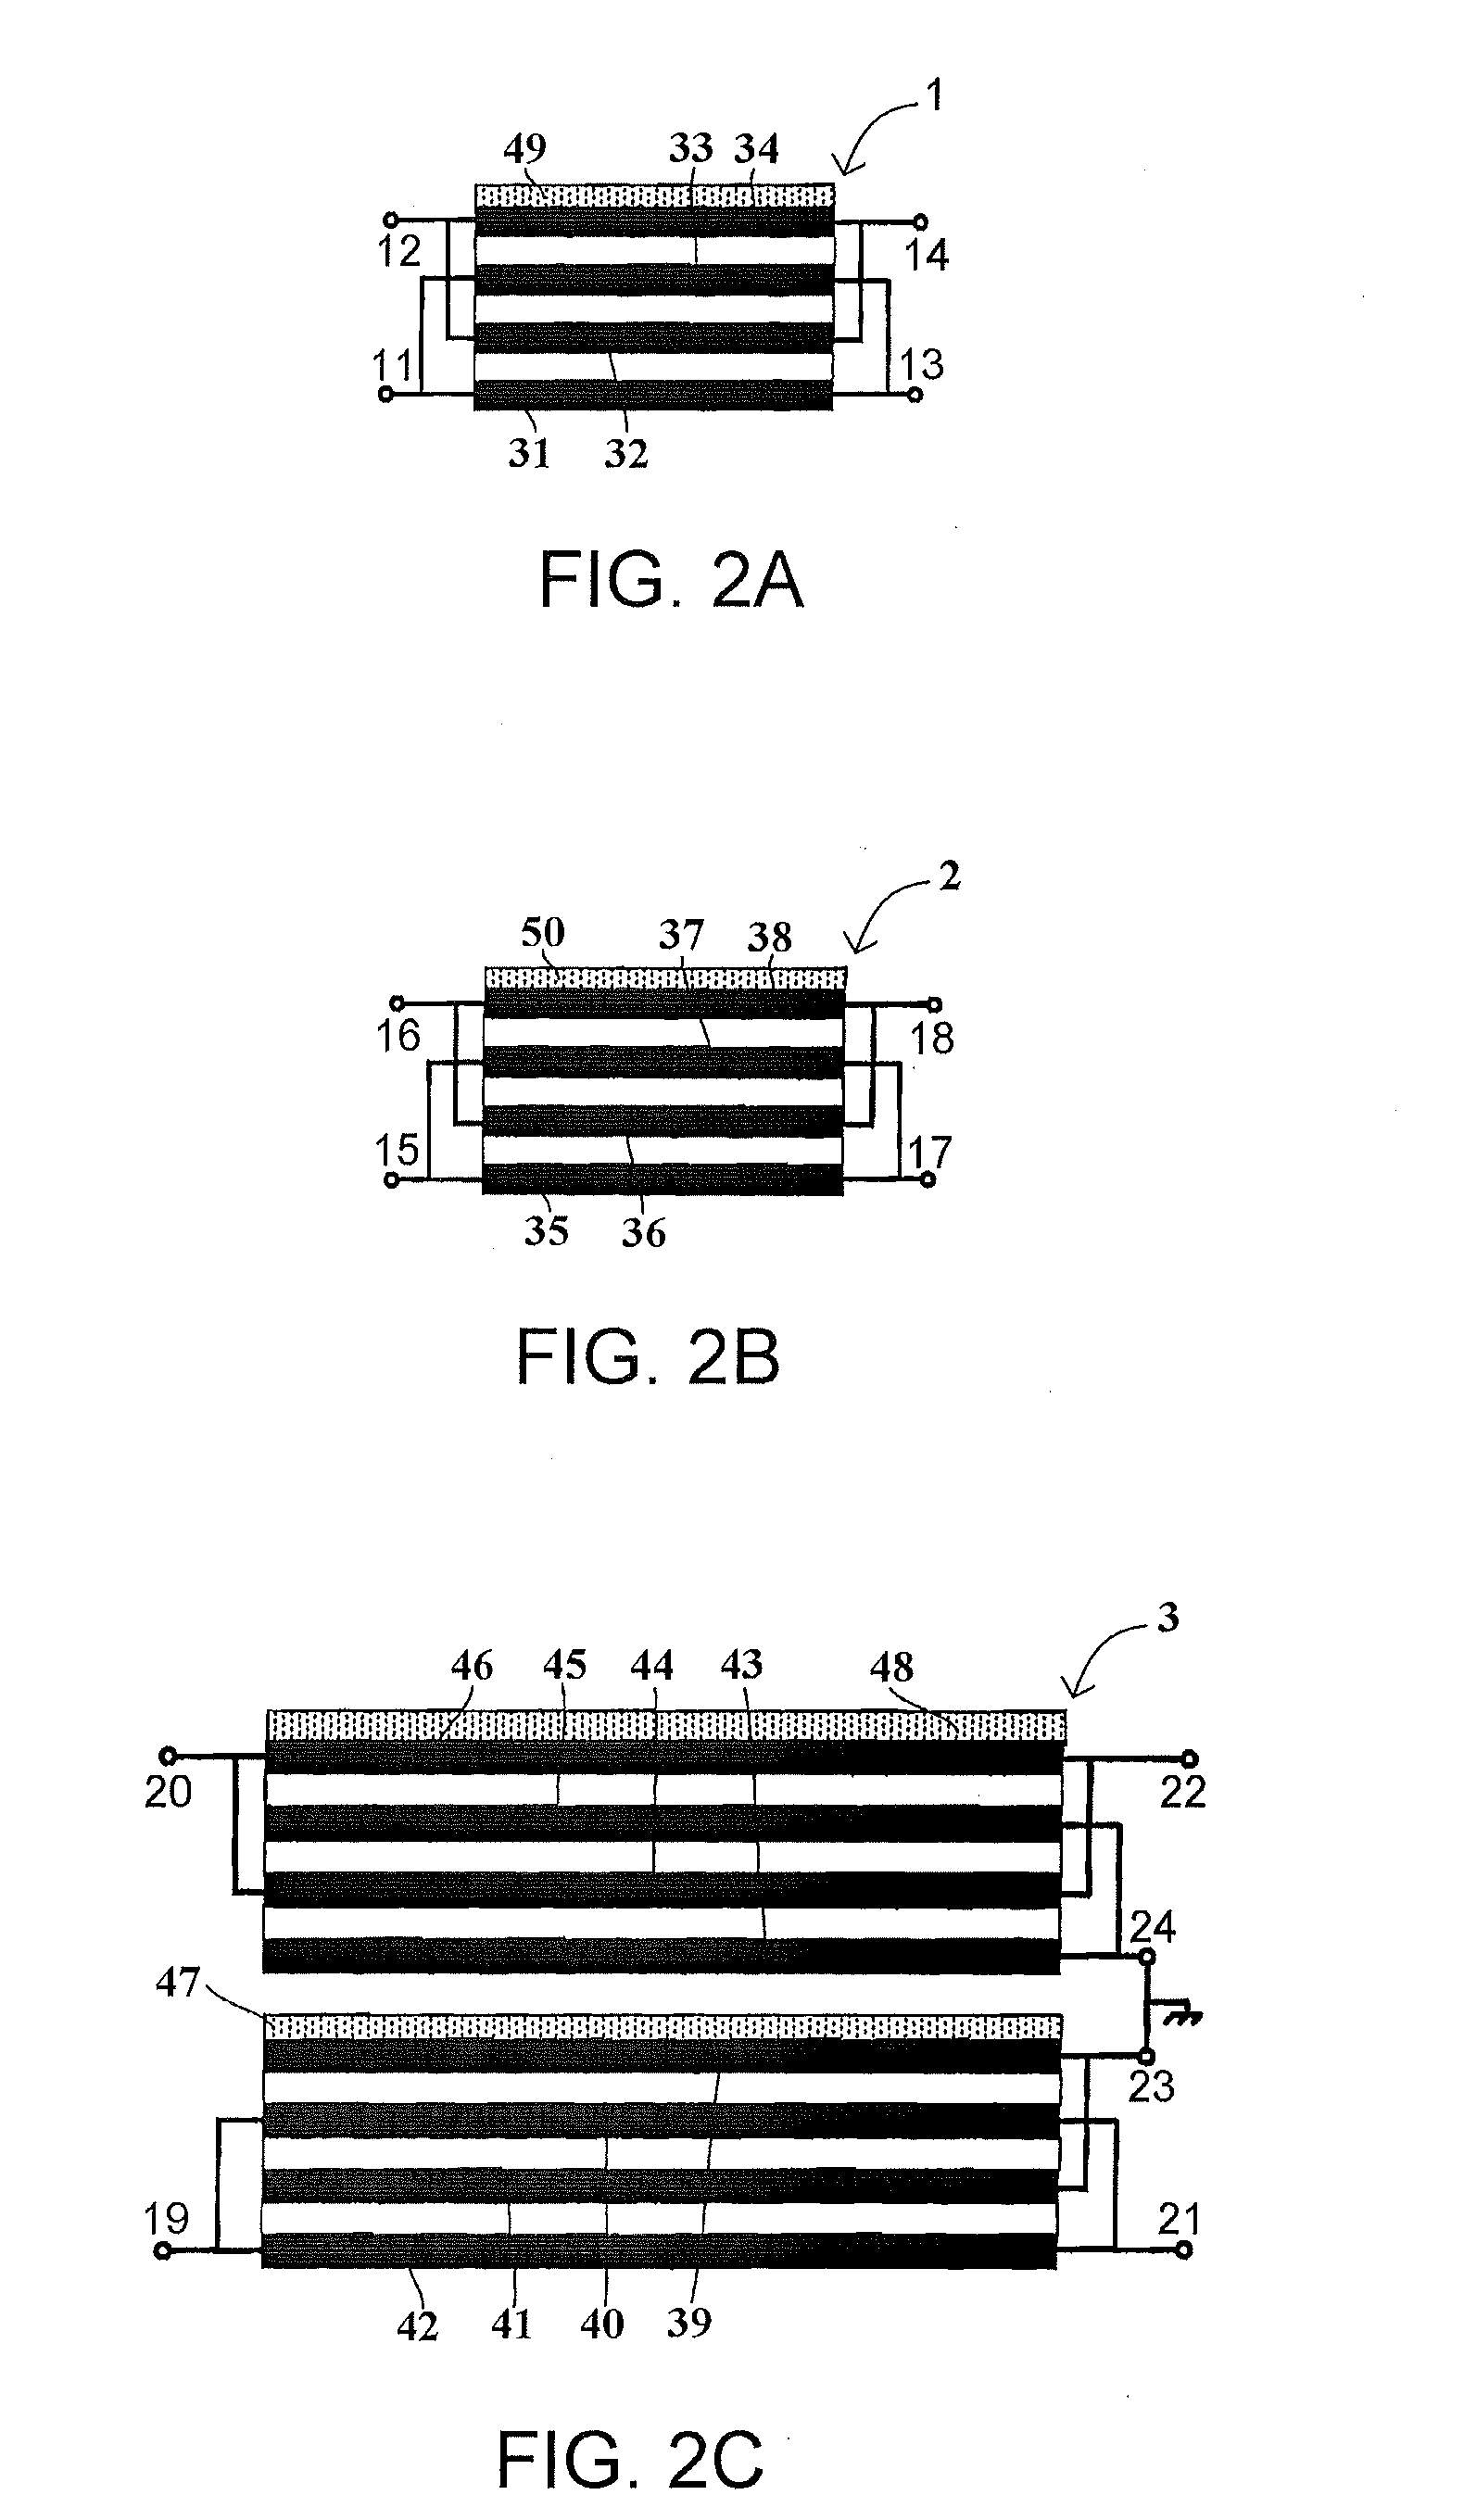 Entirely integrated EMI filter based on a flexible multi-layer strip material